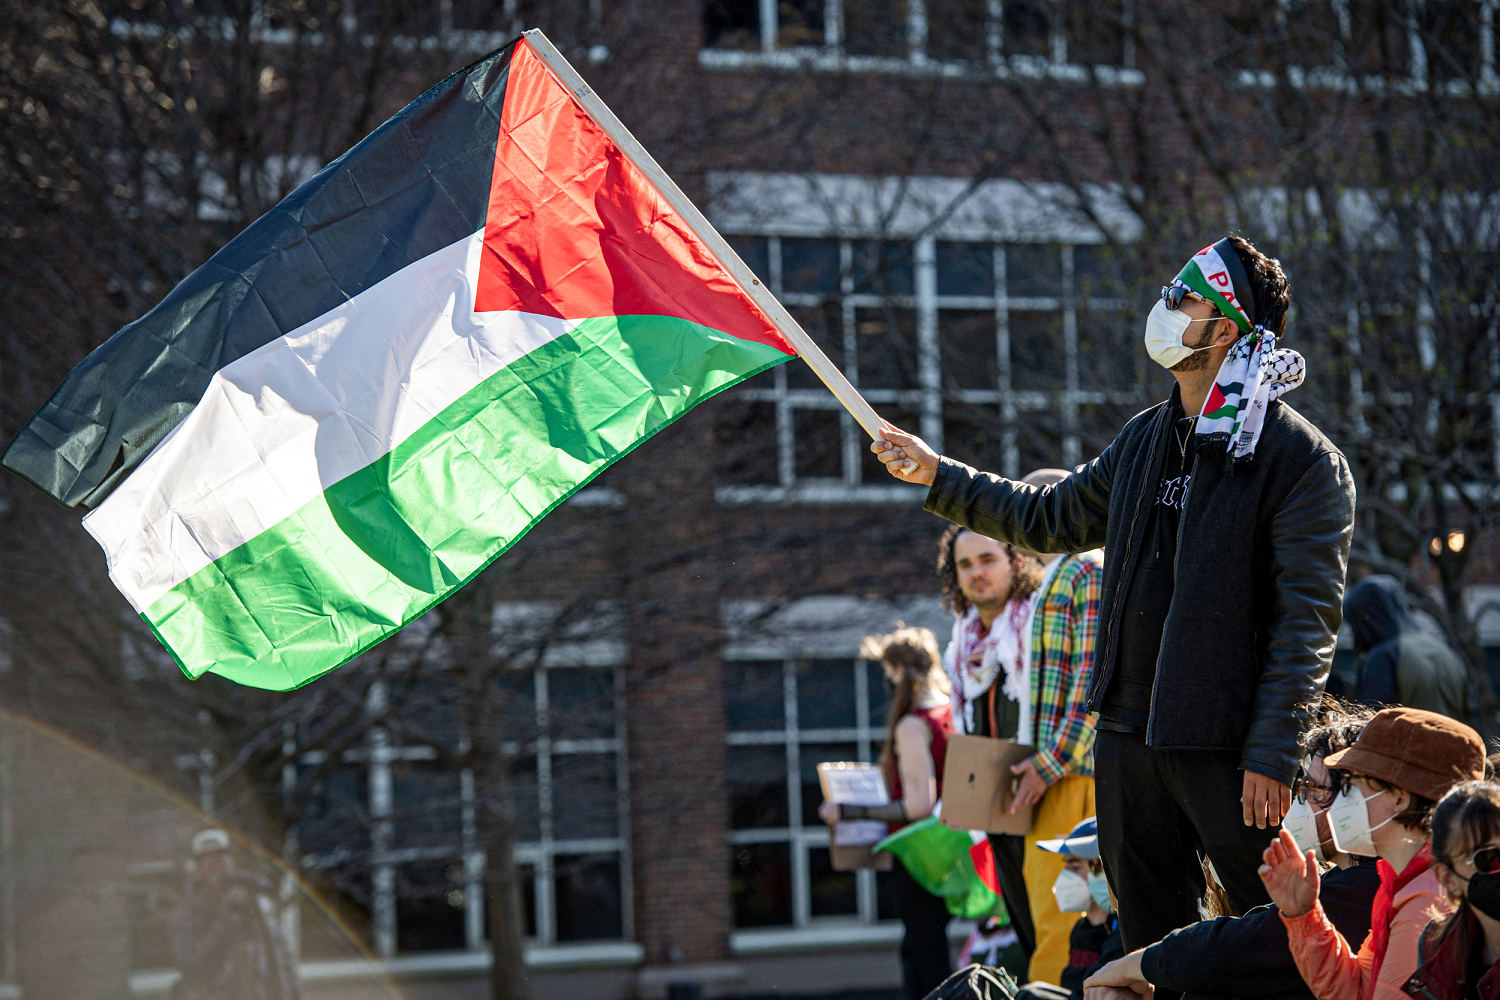 after weeks of pro-palestinian protests on campuses, colleges regroup ahead of commencement ceremonies